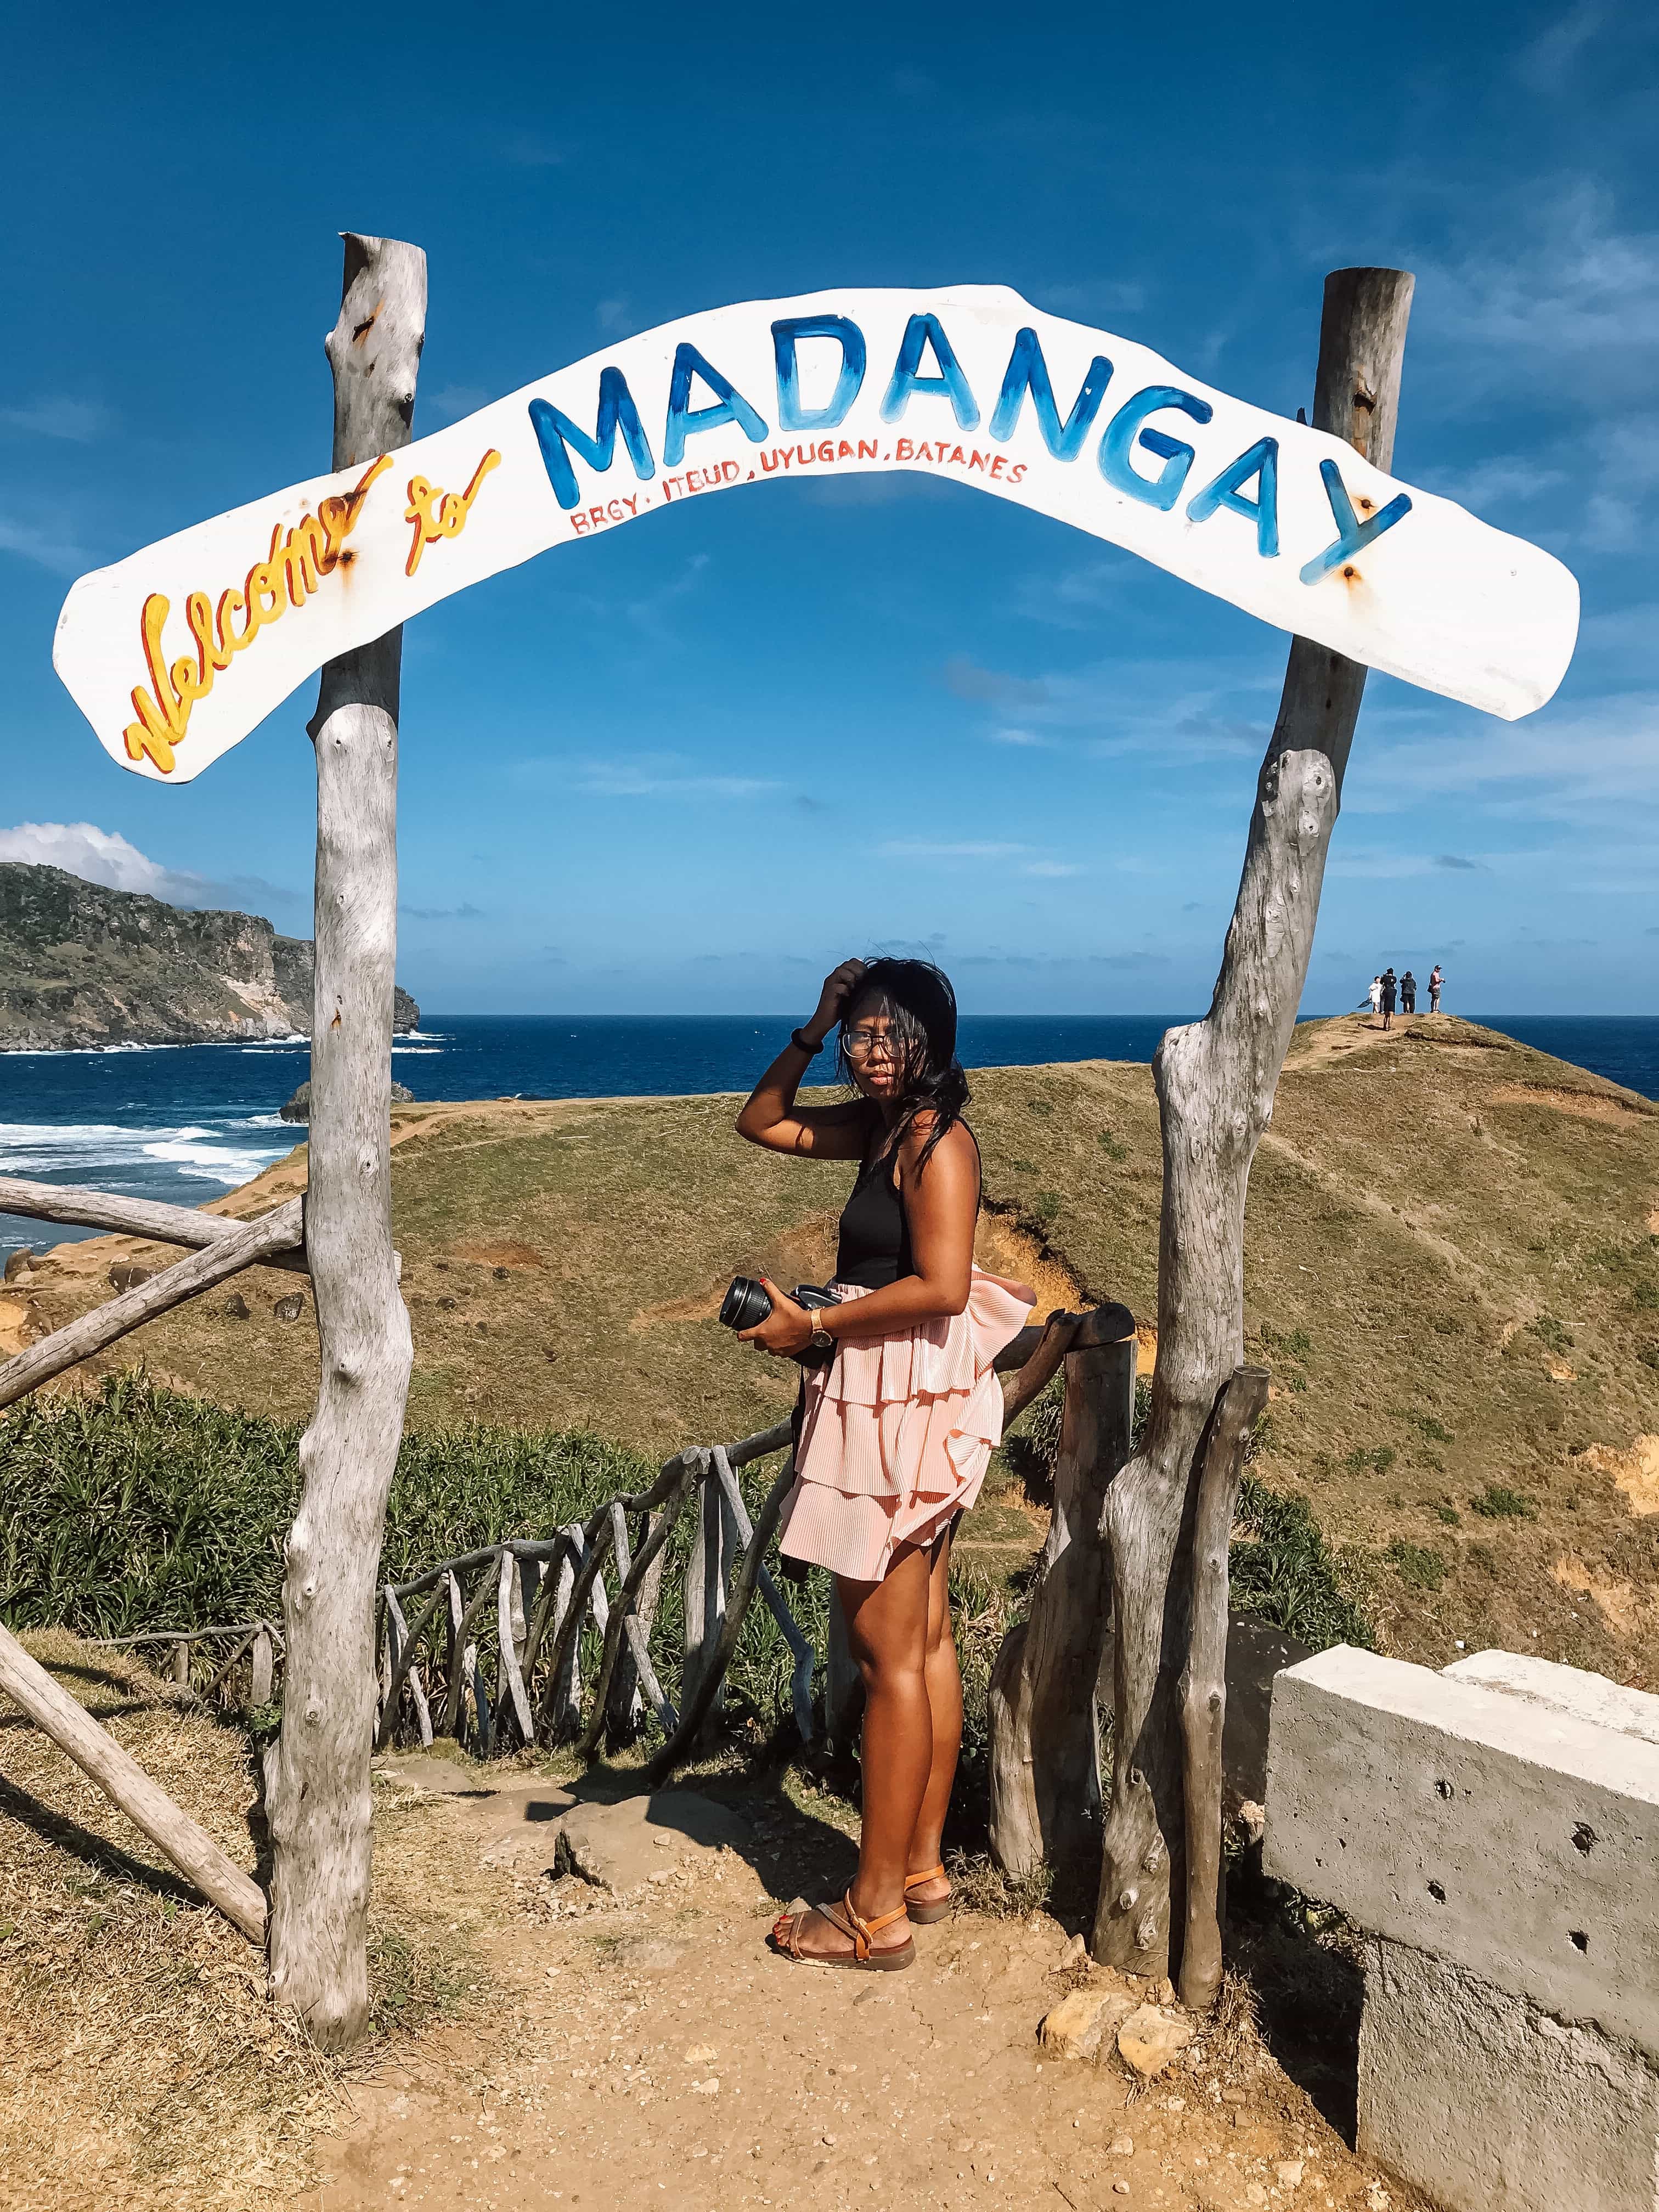 Transportation around Batanes, Batanes tourist spots, atms in batanes, wifi connection in batanes, how to go to Batanes, Madangay Beach